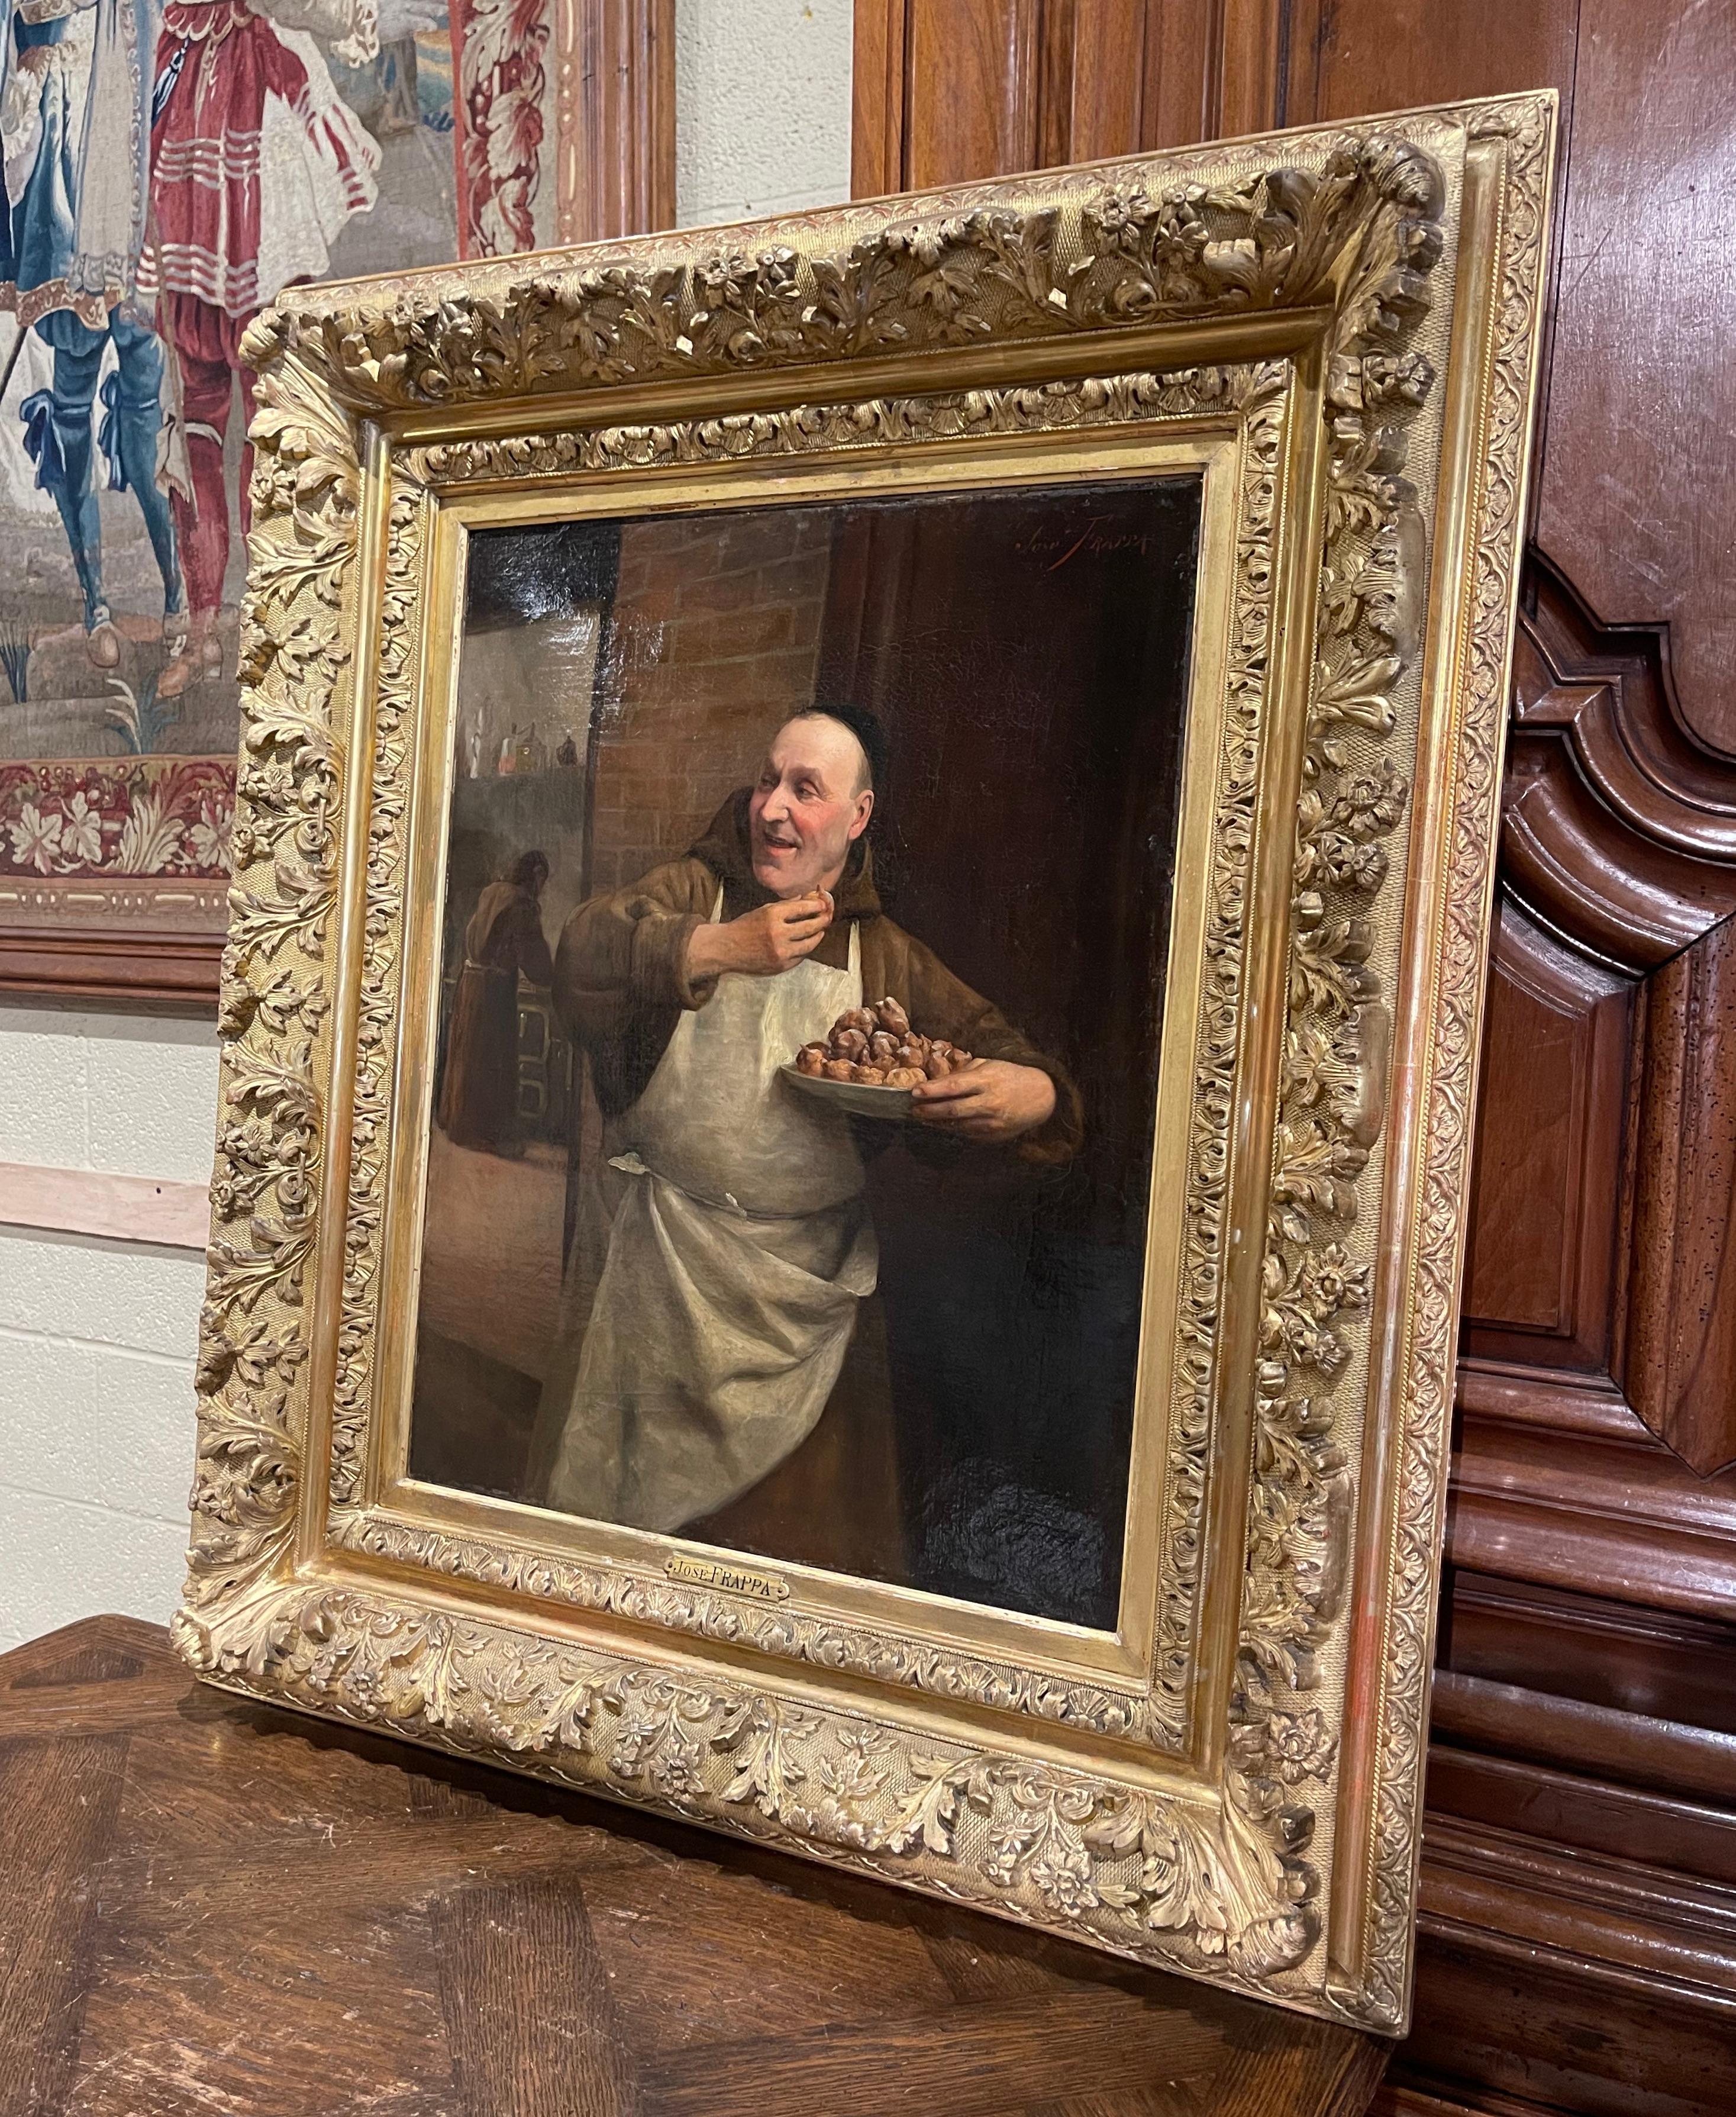 Decorate a study or office with this joyful antique painting. Set in the original carved giltwood frame, the artwork, signed in the lower right corner by the artist, Jose Frappa, features a happy monk testing some fresh home made donuts known as